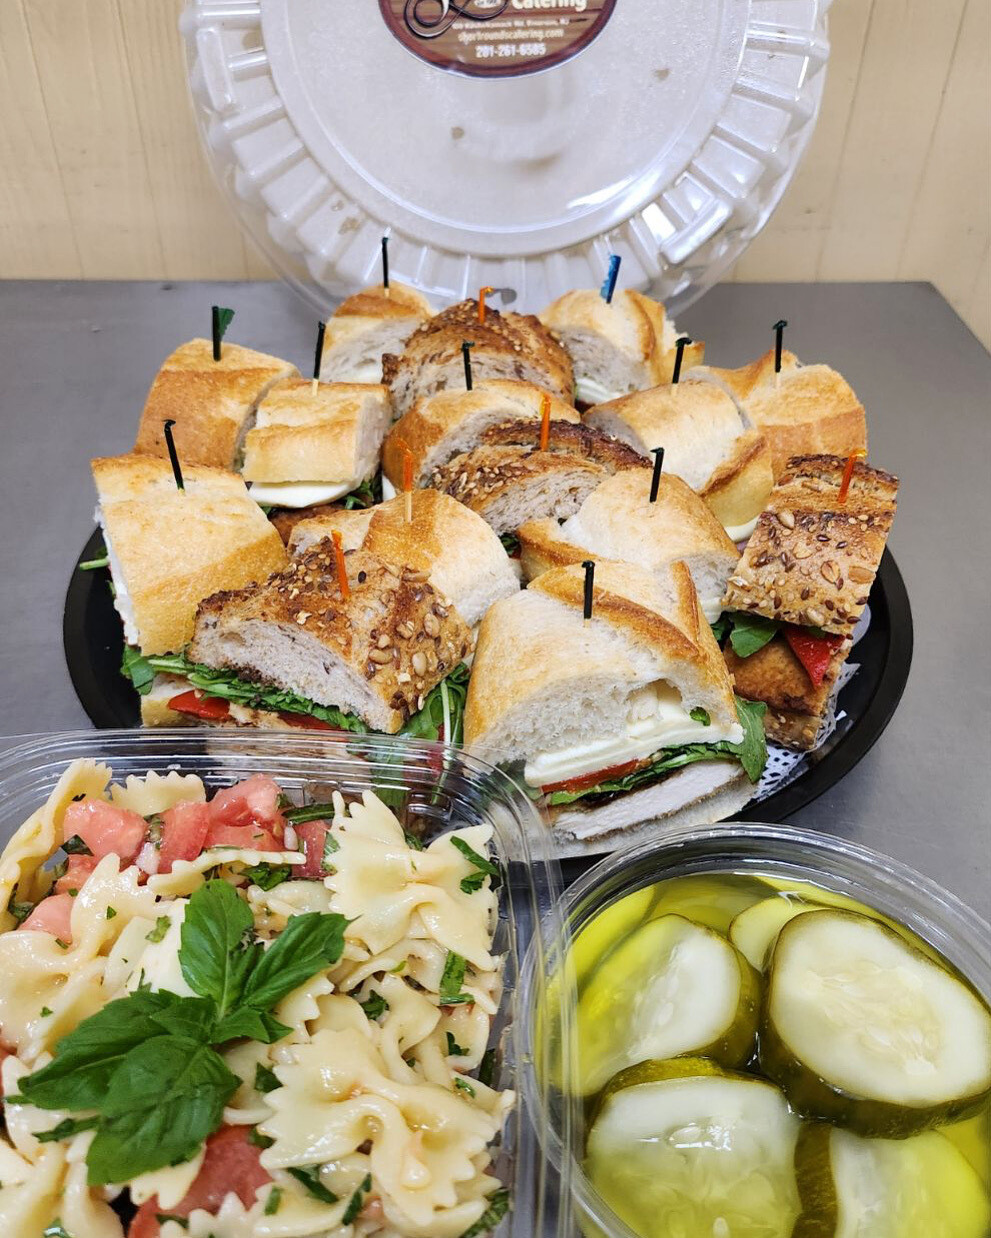 Family Meal: Shortrounds Signature Sandwiches, Tuesday, May 21st